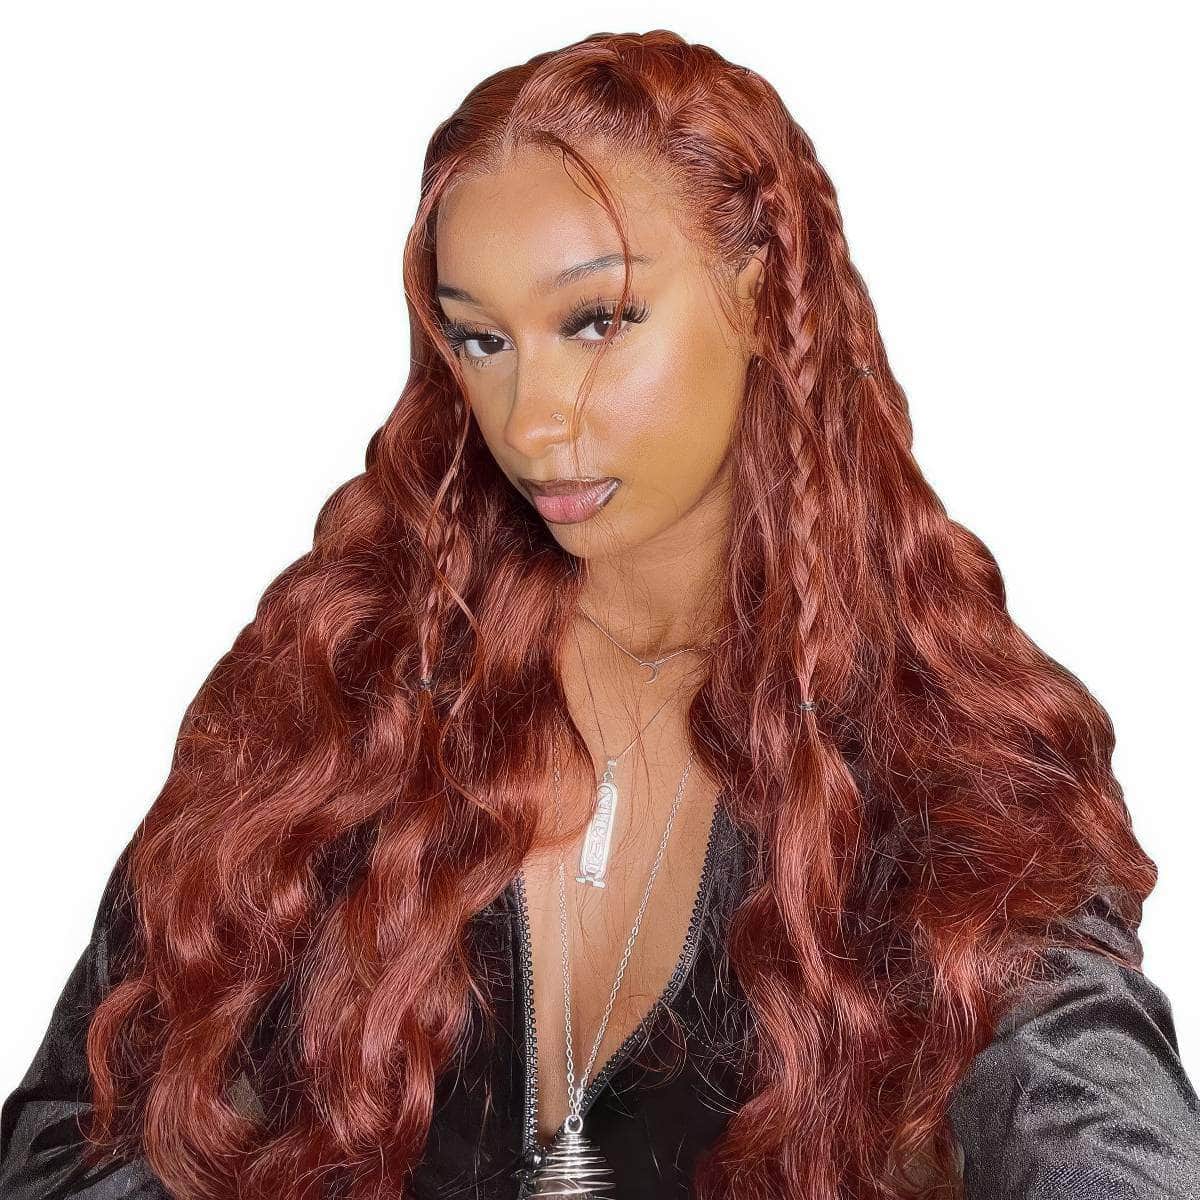 Peruvian Body Wave Reddish Brown Glueless Wig - Wear And Go, 6x4 Lace Front, Ready To Wear, Color 33, Pre-Cut Wig 12inches